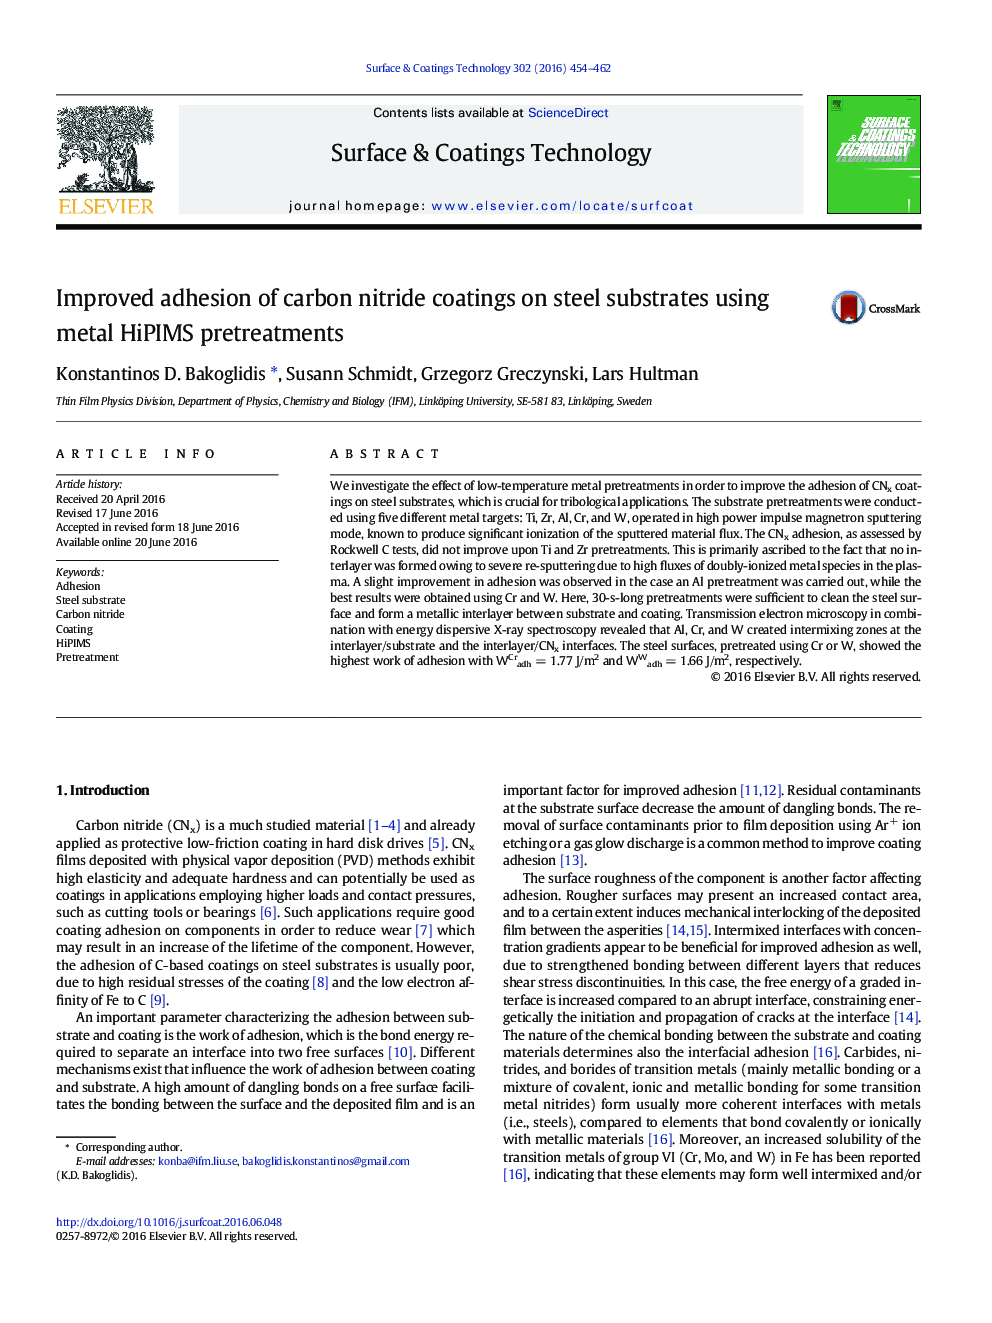 Improved adhesion of carbon nitride coatings on steel substrates using metal HiPIMS pretreatments